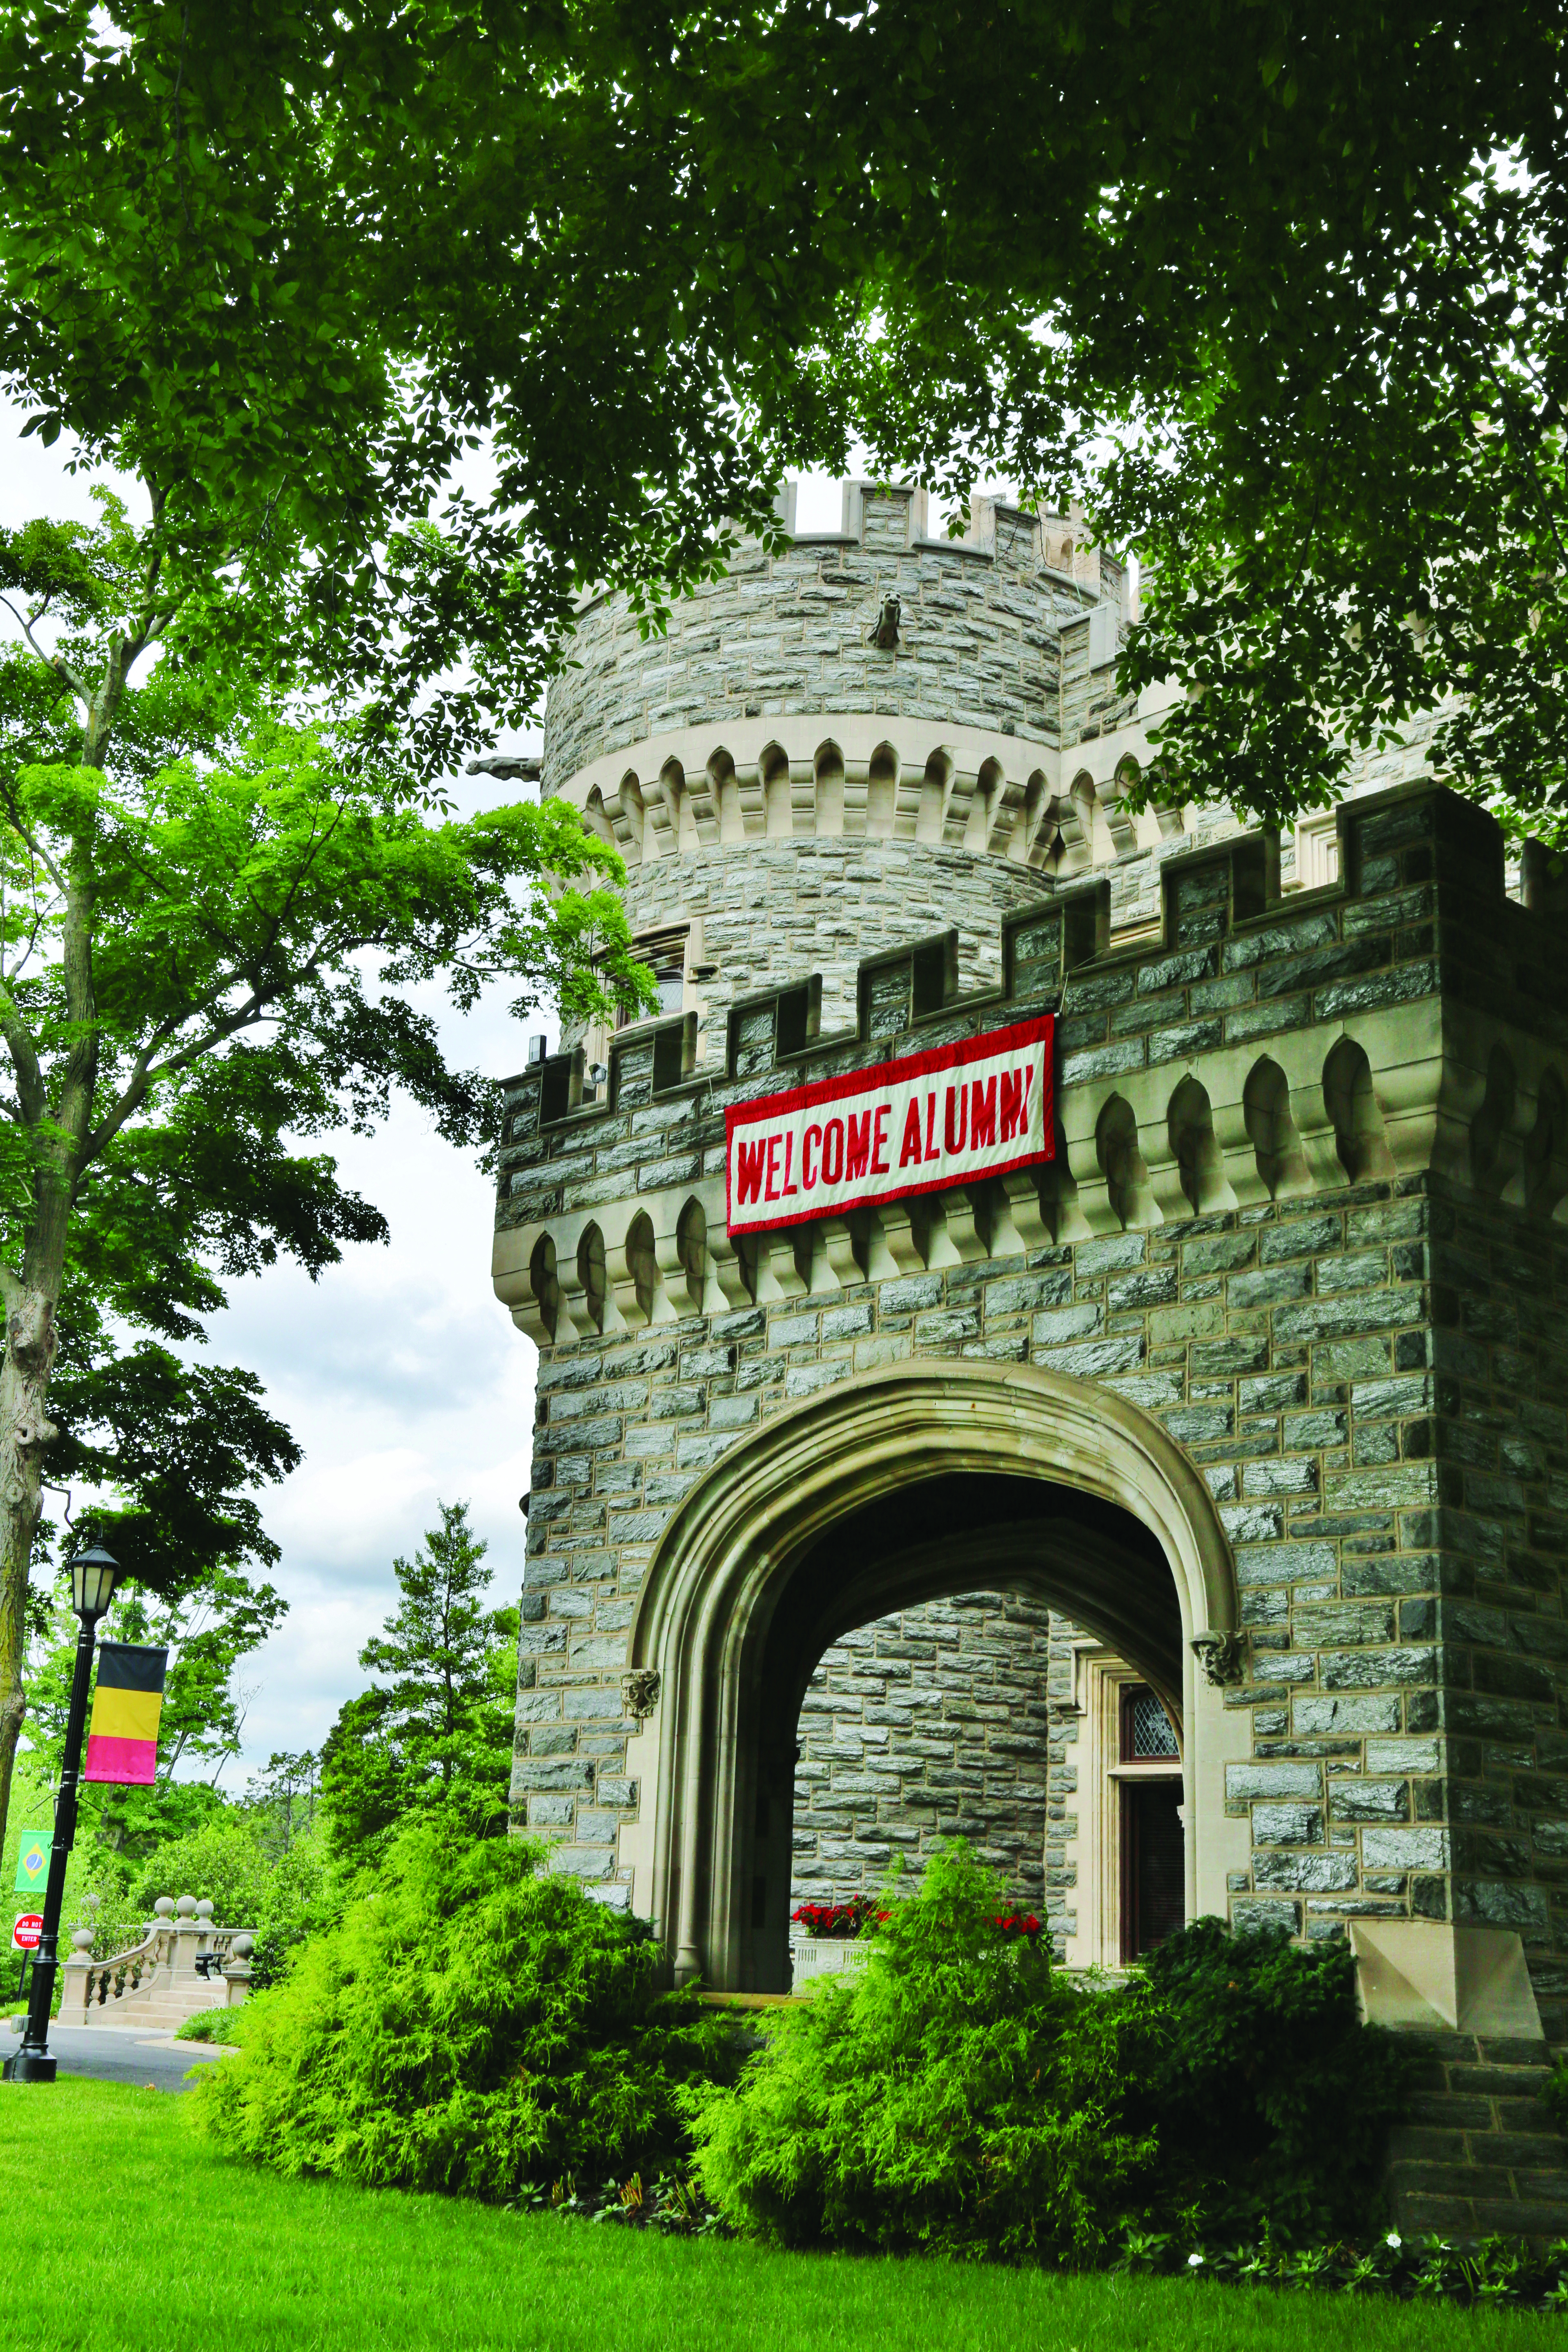 Grey Towers Castle with a banner welcoming alumni.